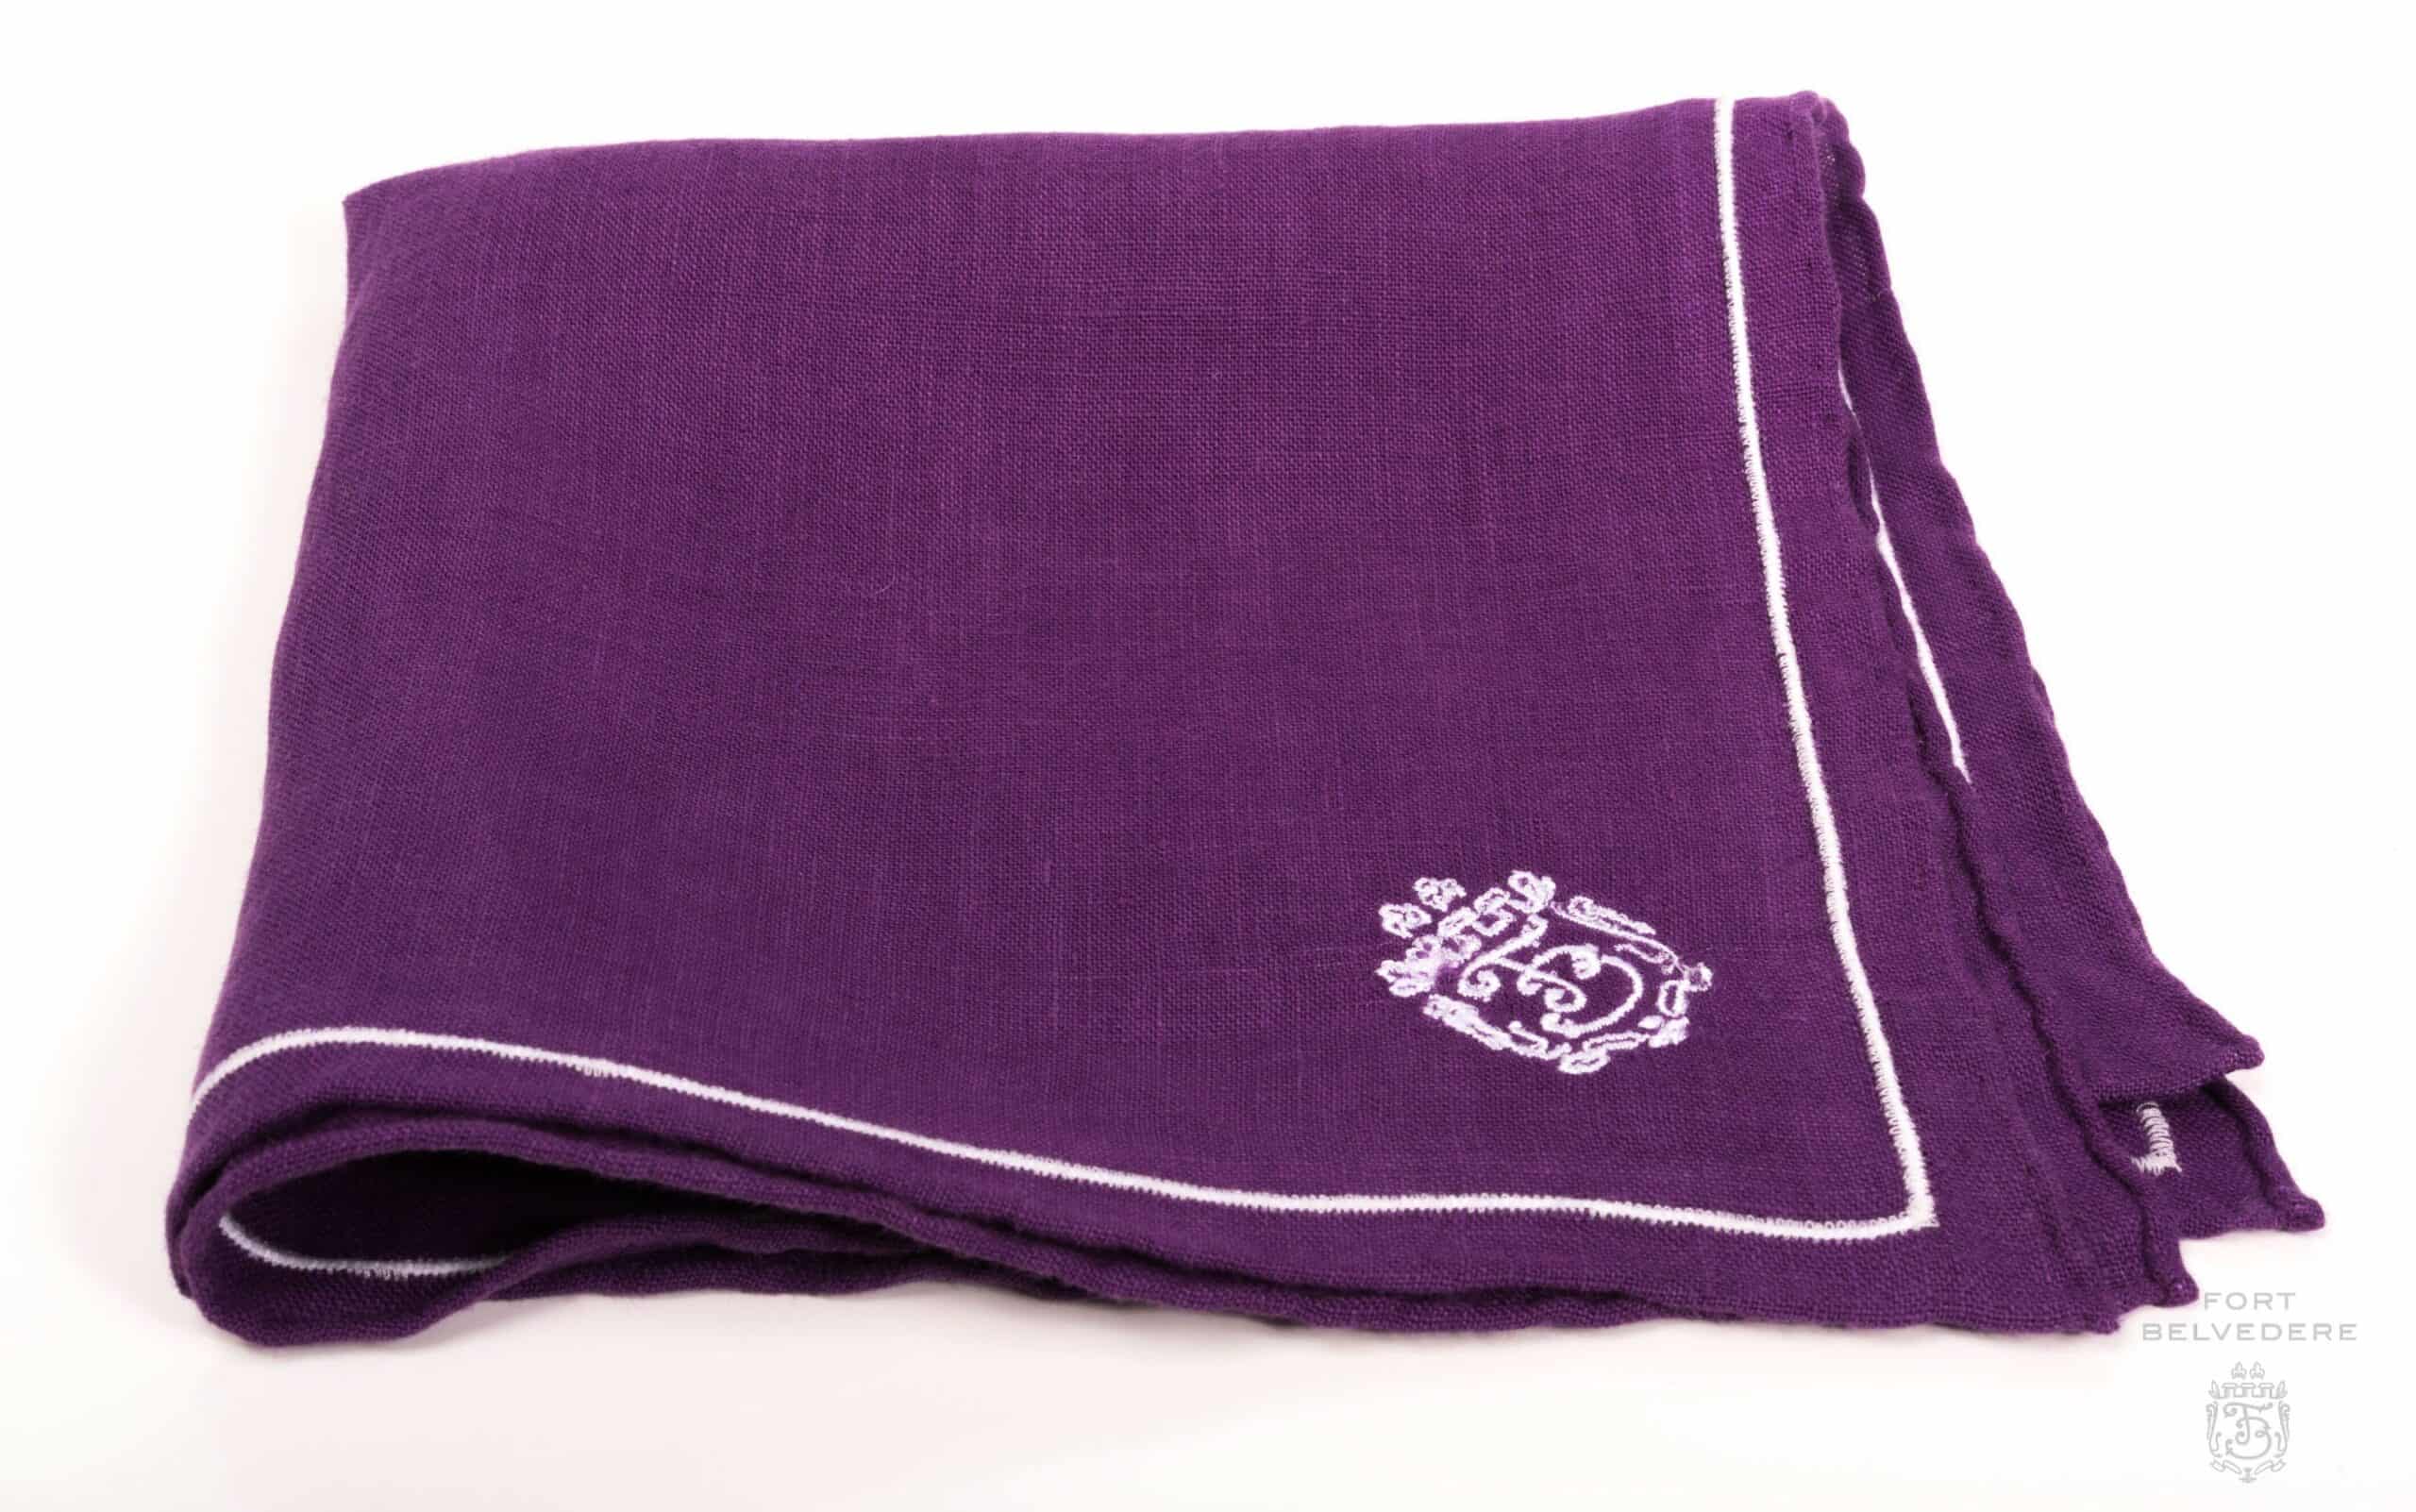 Purple Linen Pocket Square with Silver Grey Contrast Embroidery - Fort Belvedere